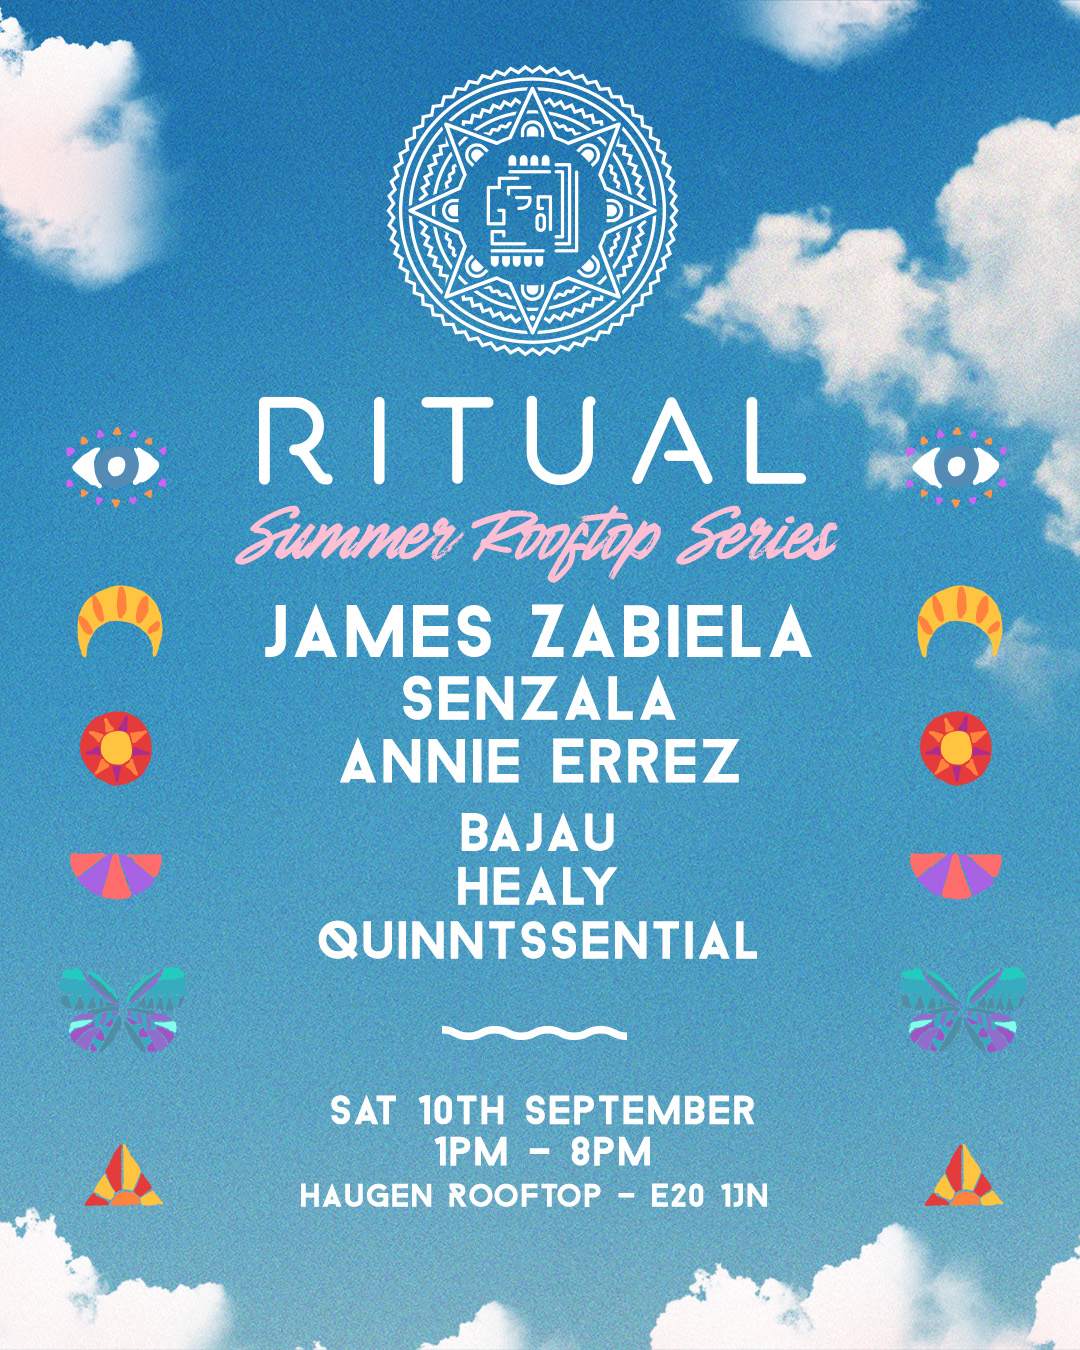 Ritual - Summer rooftop series with James Zabiela - フライヤー表